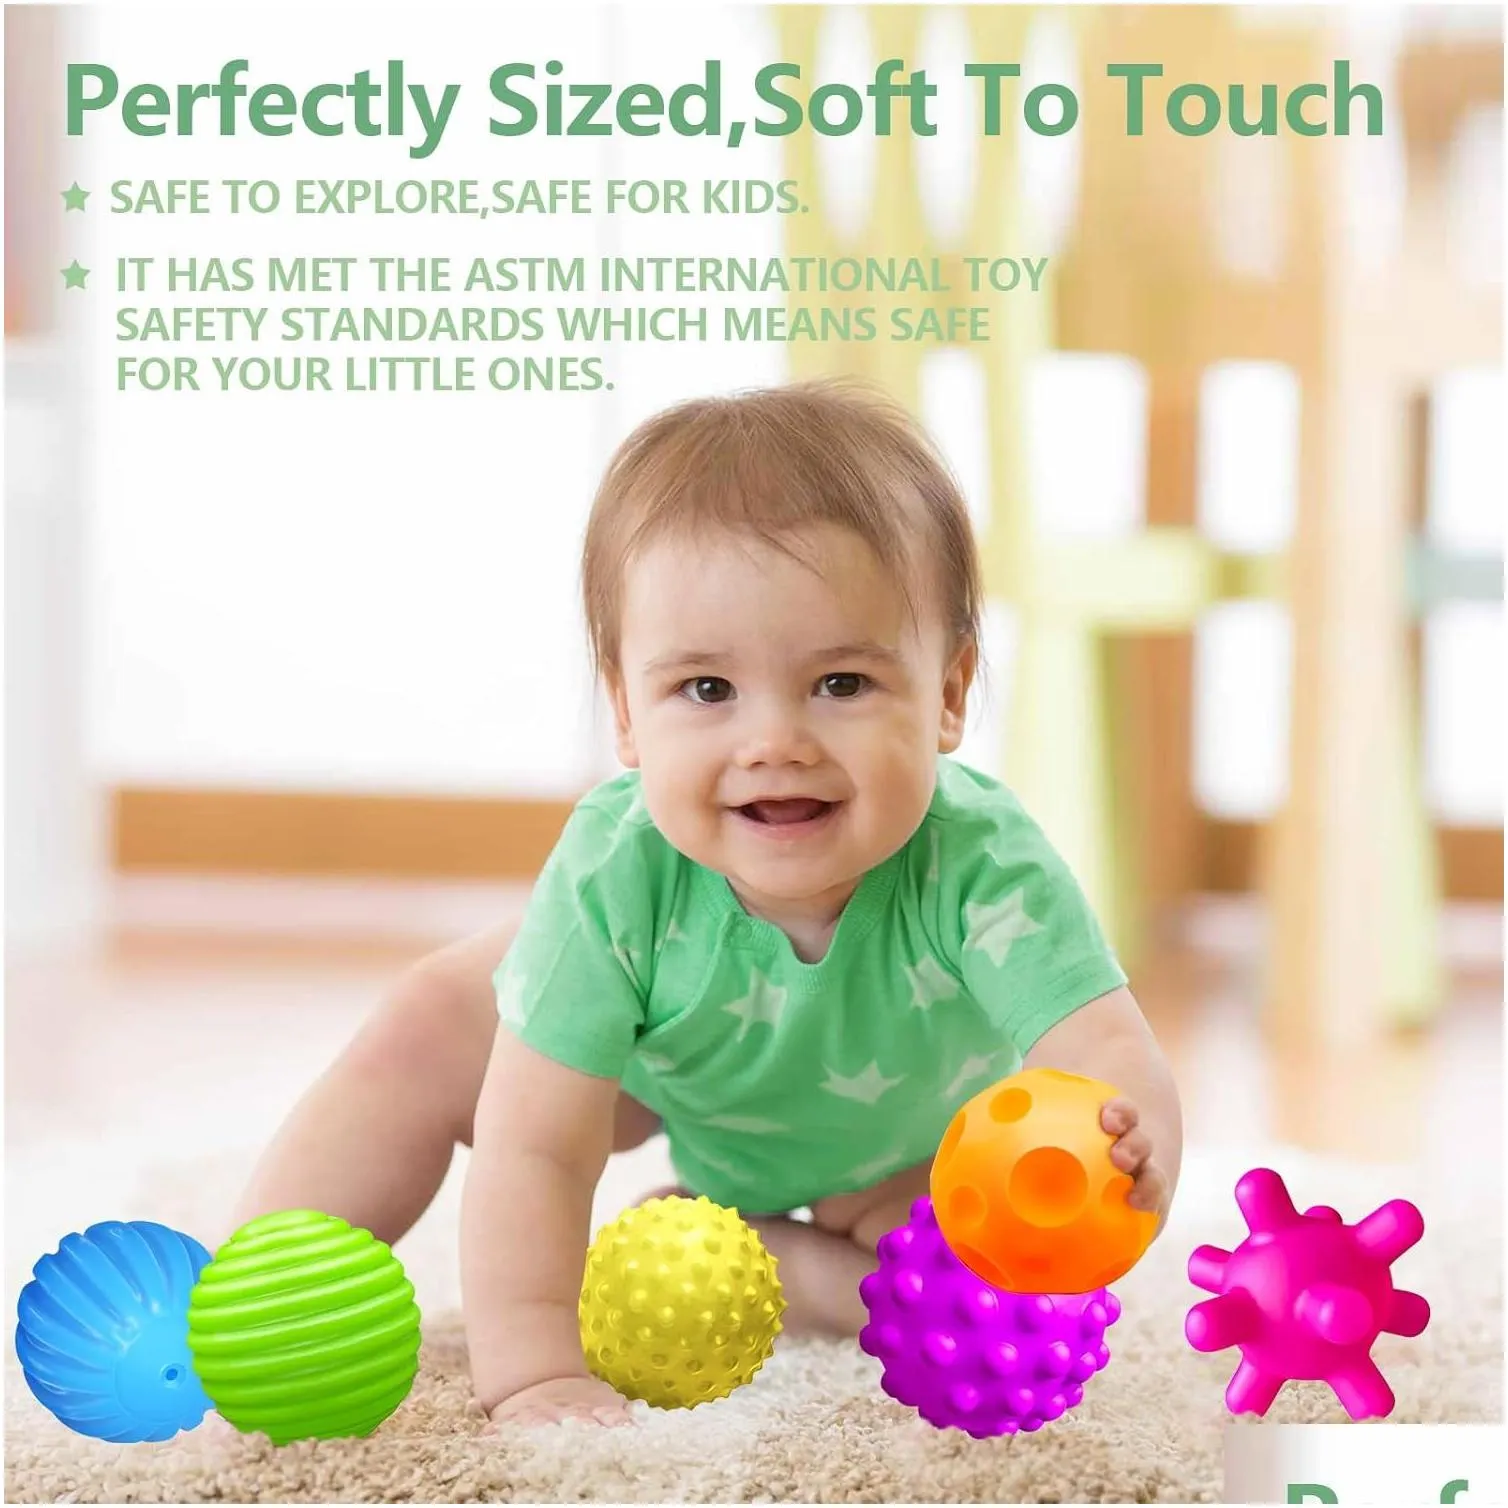 Other Toys Sensory Balls For Baby 6 To 12 Months Toddlers 1-3 Bright Color Textured Mti Soft Ball Gift Sets Montessori Babies 6-12 Inf Ot0Ro